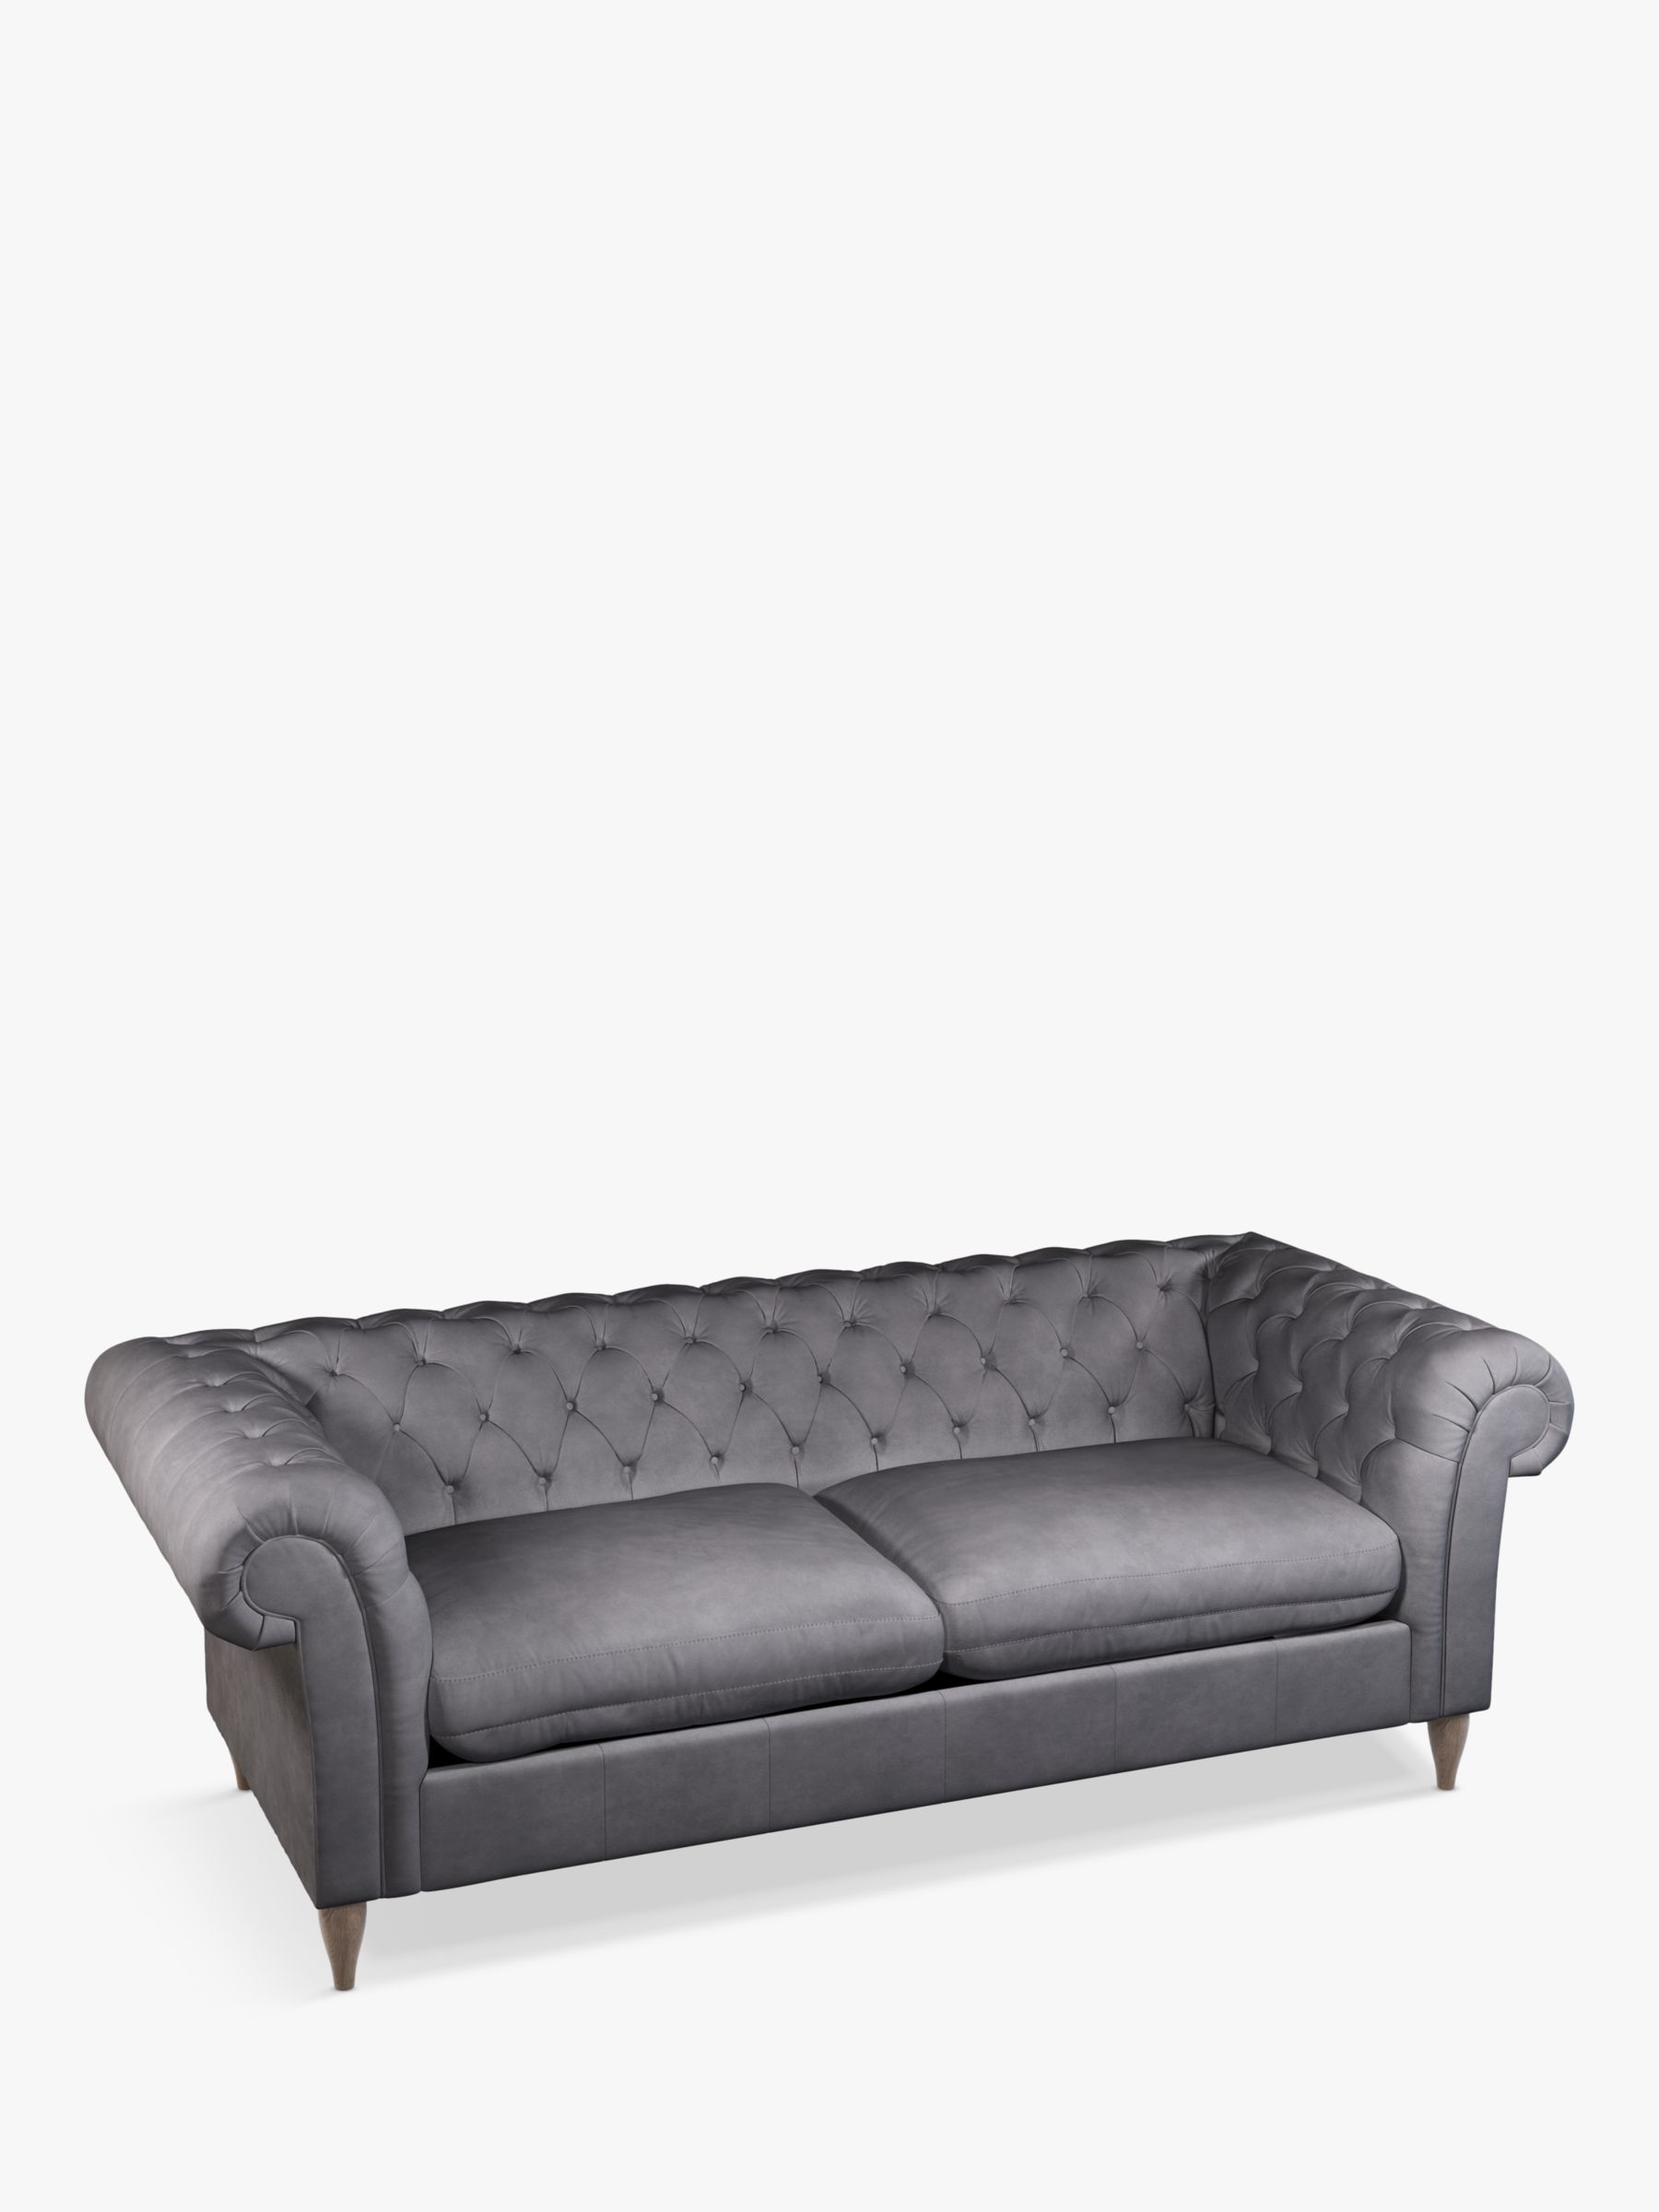 John Lewis Cromwell Chesterfield Double Leather Sofa Bed, Dark Leg